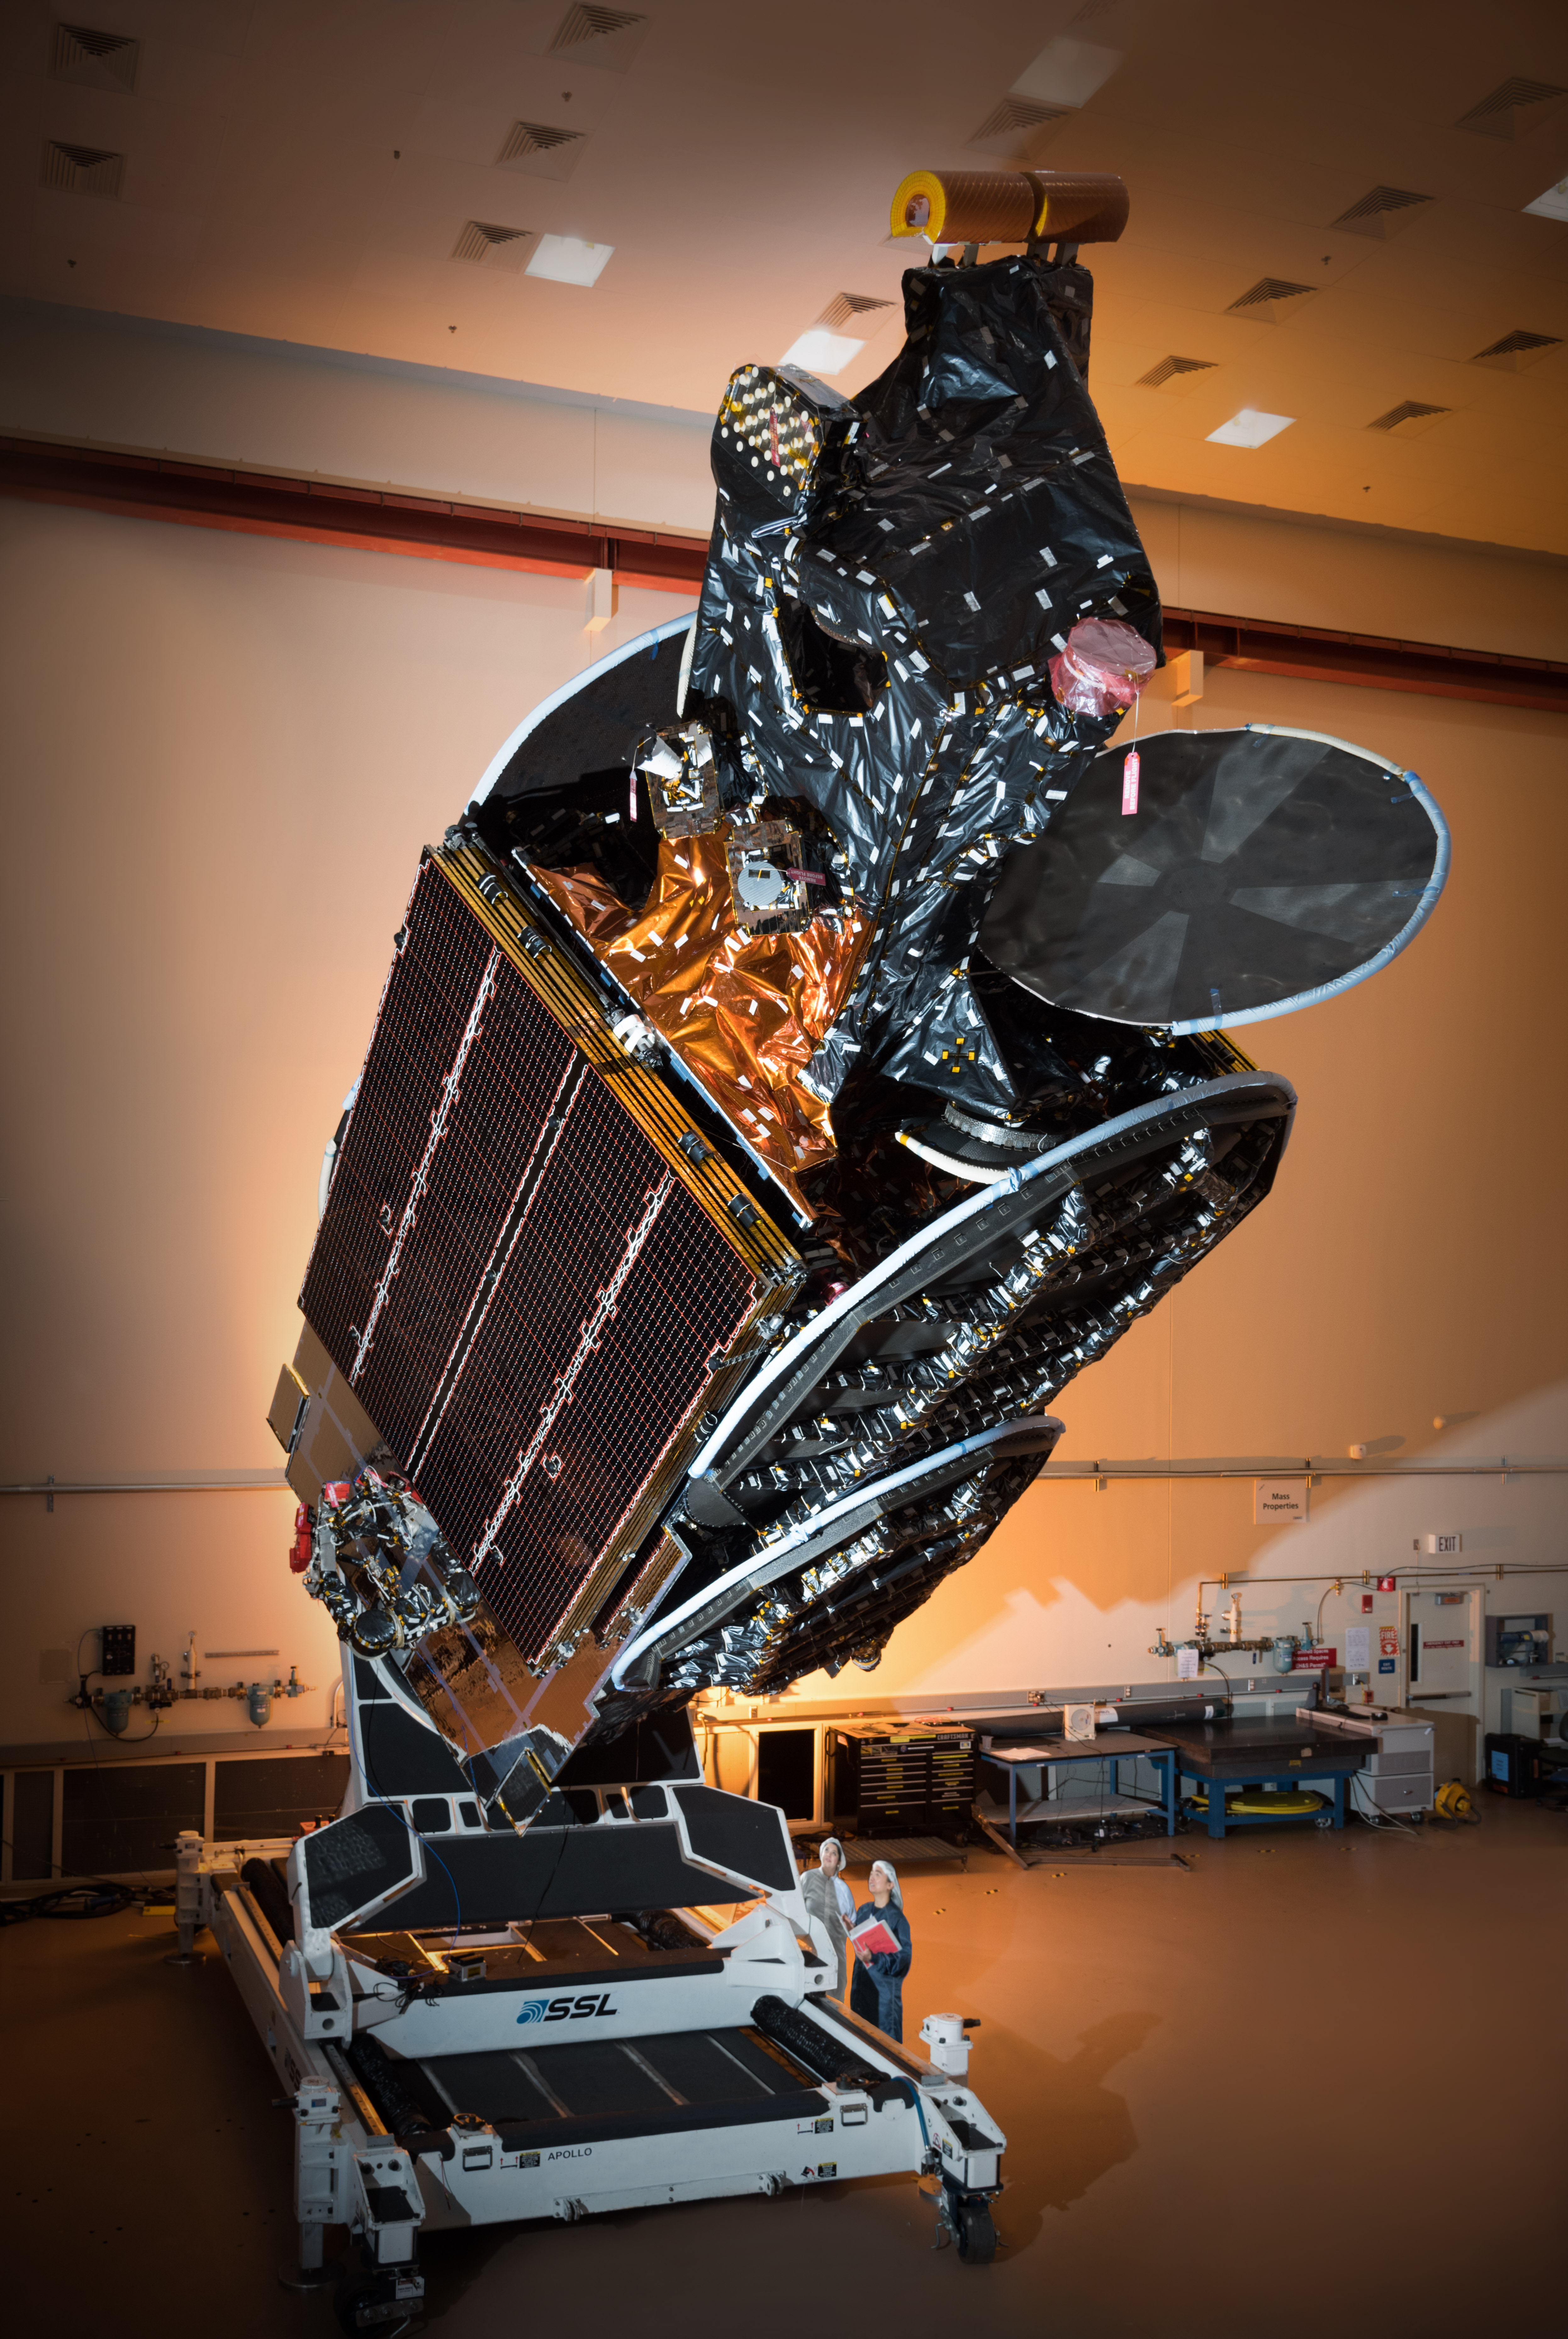 AsiaSat 9 in Launch Configuration at SSL Spacecraft Manufacturing Facility in Palo Alto, Calif. Image courtesy of SSL